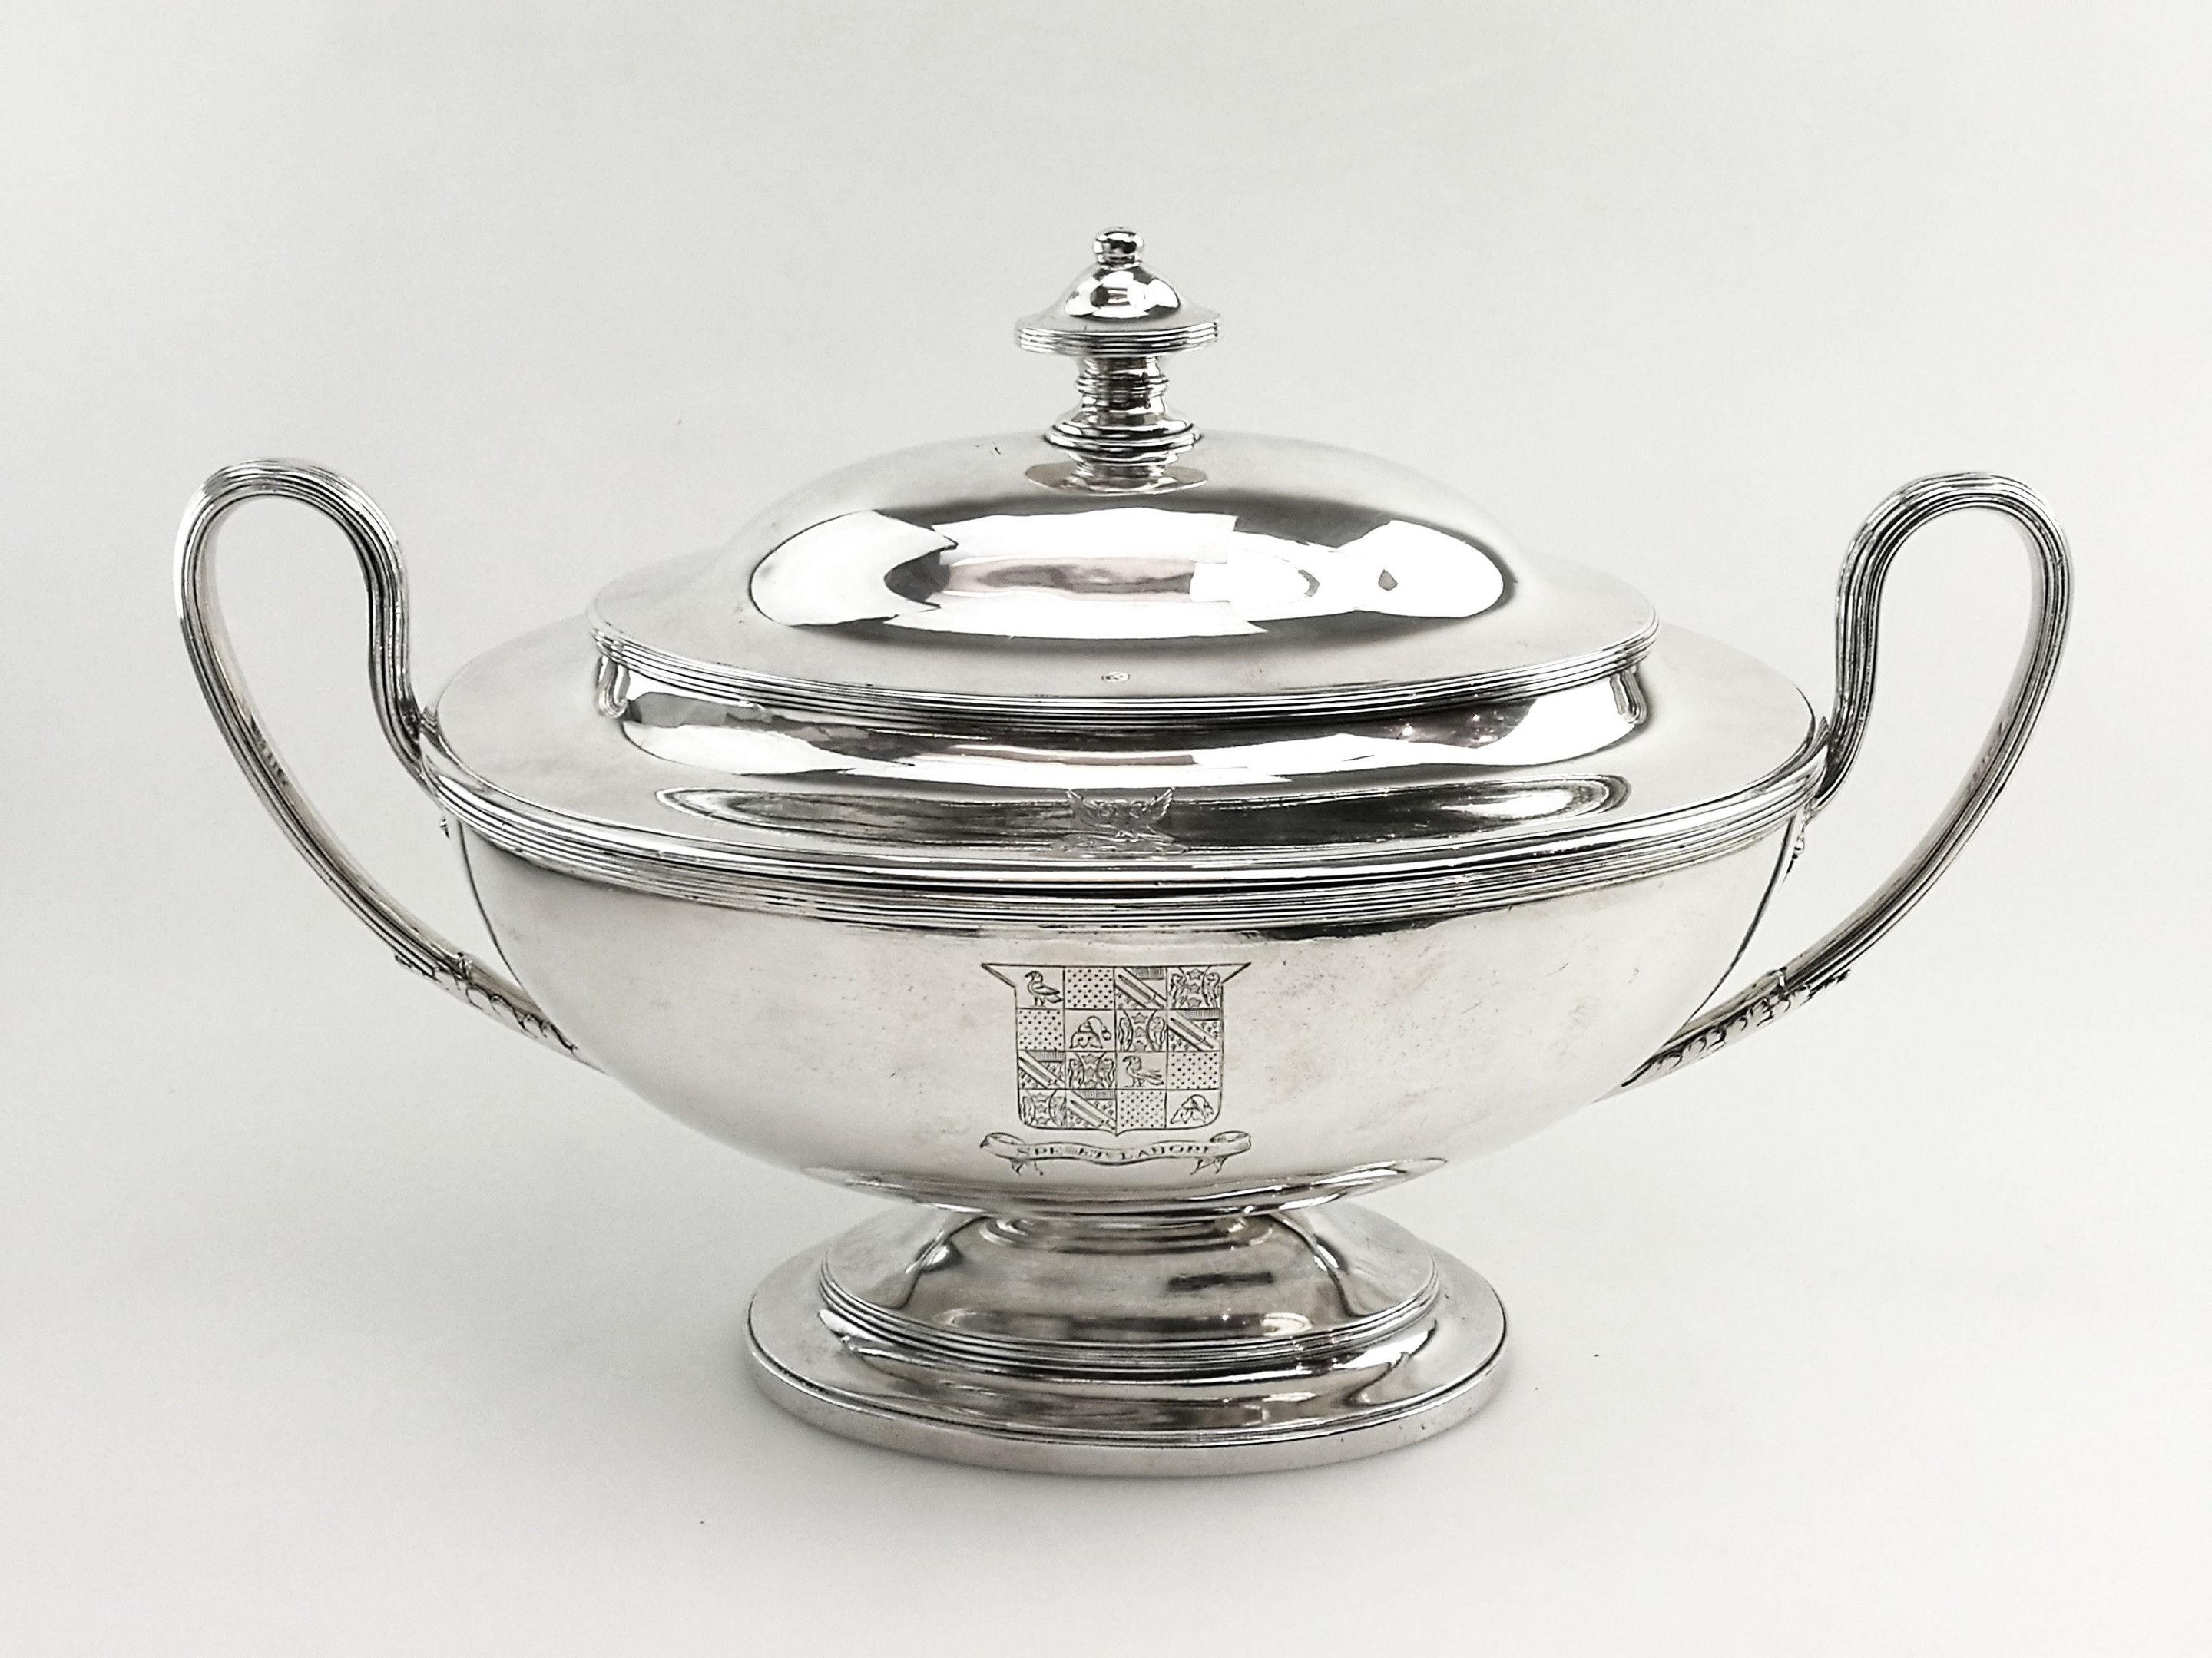 A classic Antique George III Georgian Sterling Silver Soup Tureen in an oval form with two substantial reeded loop handles. The Tureen stands on an oval spread foot and has an impressive domed lid with an oval finial. There is a crest engraved on